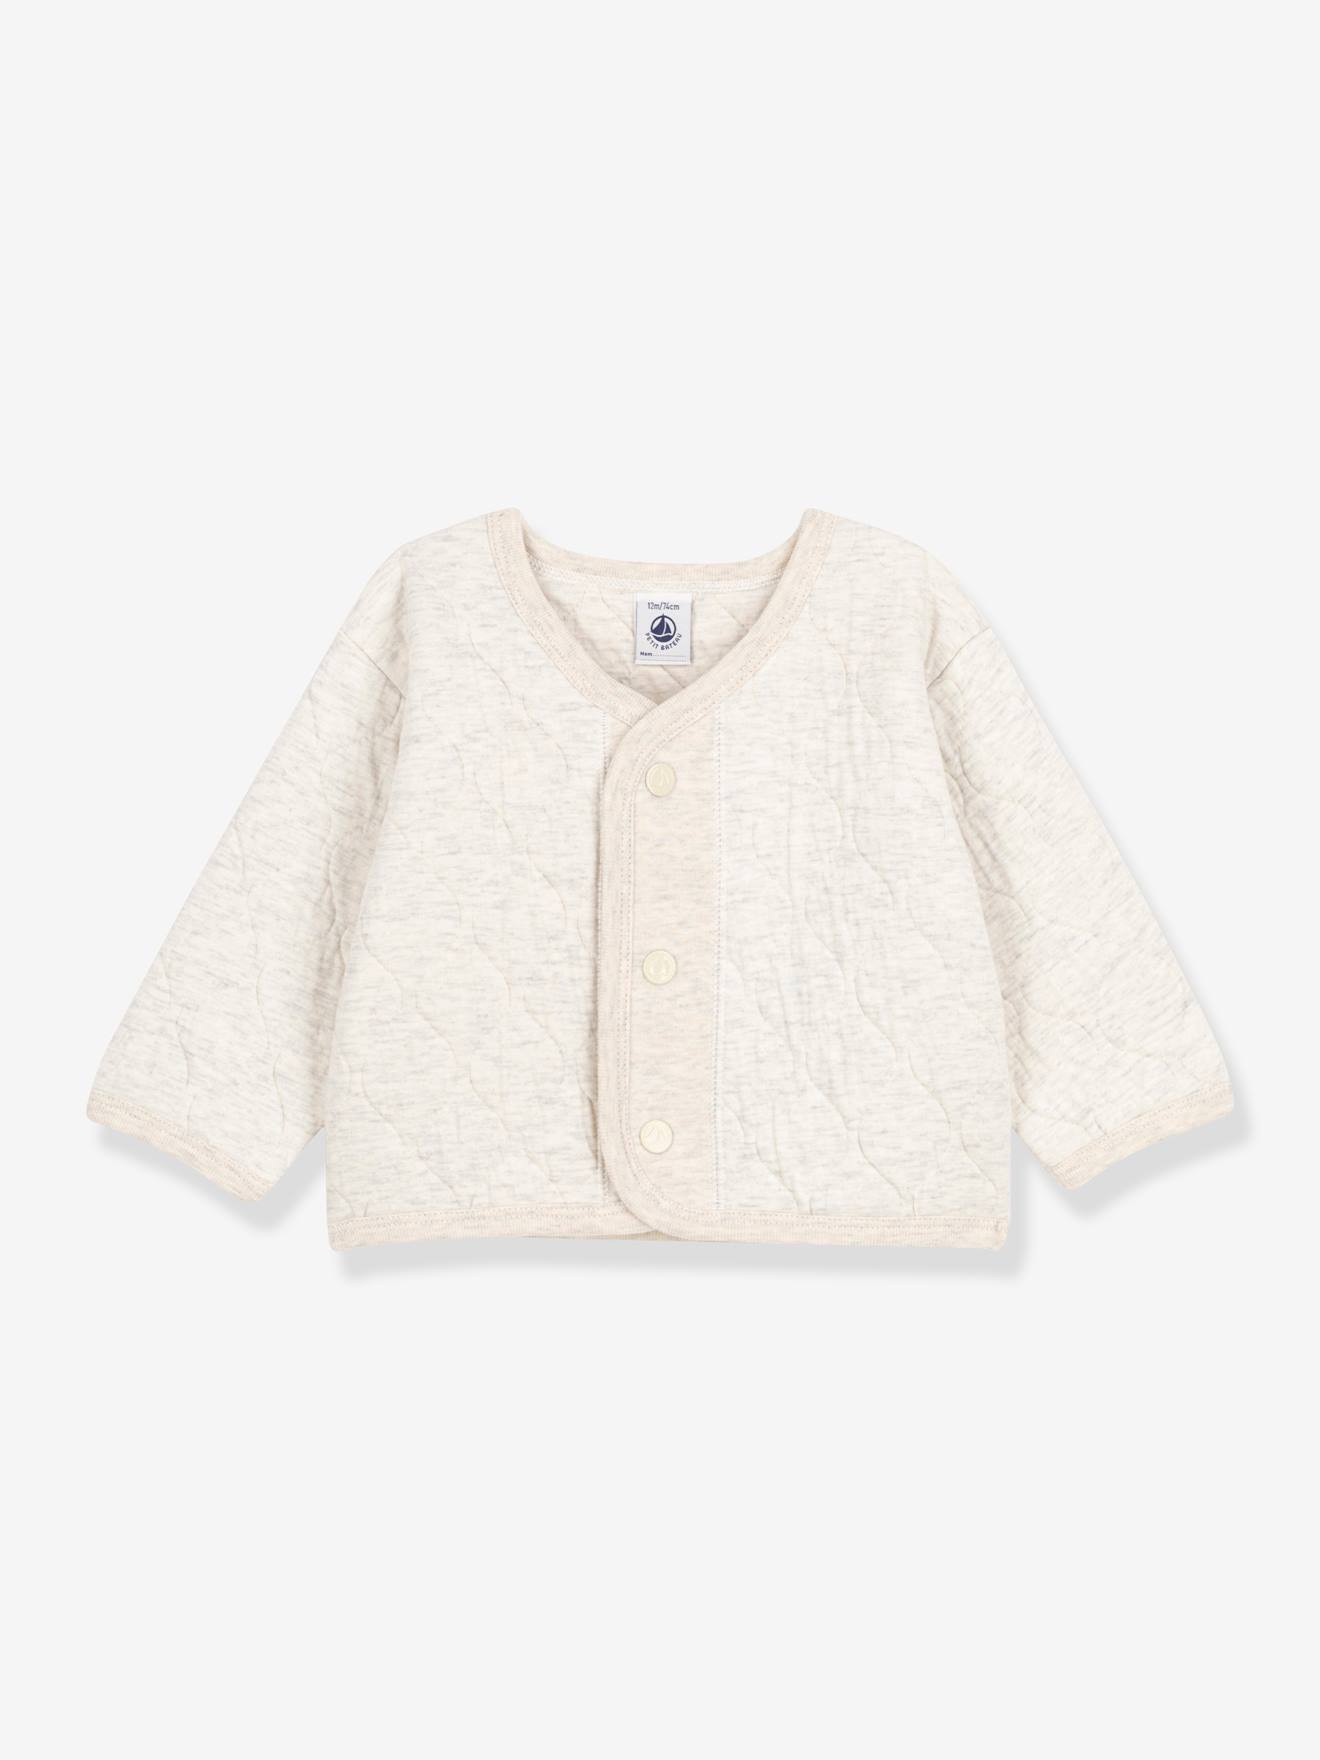 Quilted Double Knit Cardigan for Babies - PETIT BATEAU marl beige